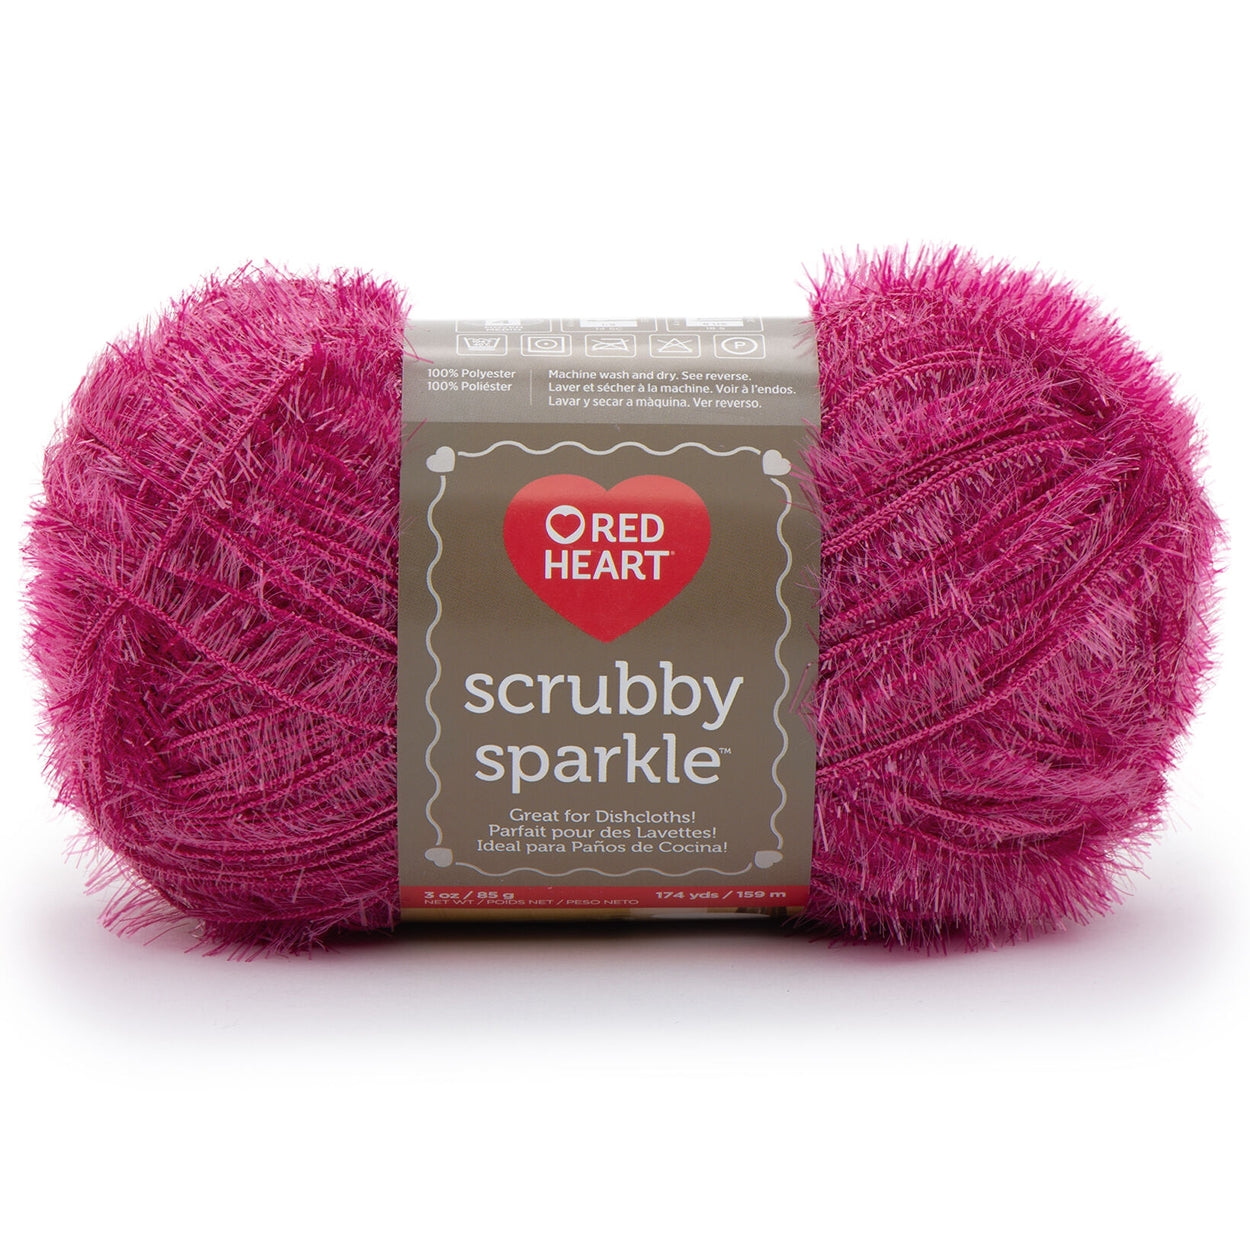 Scrubby Sparkle Yarn from Red Heart, For Quick Drying Washcloths Scrubby Sparkle Yarn from Red Heart Yarn Designers Boutique